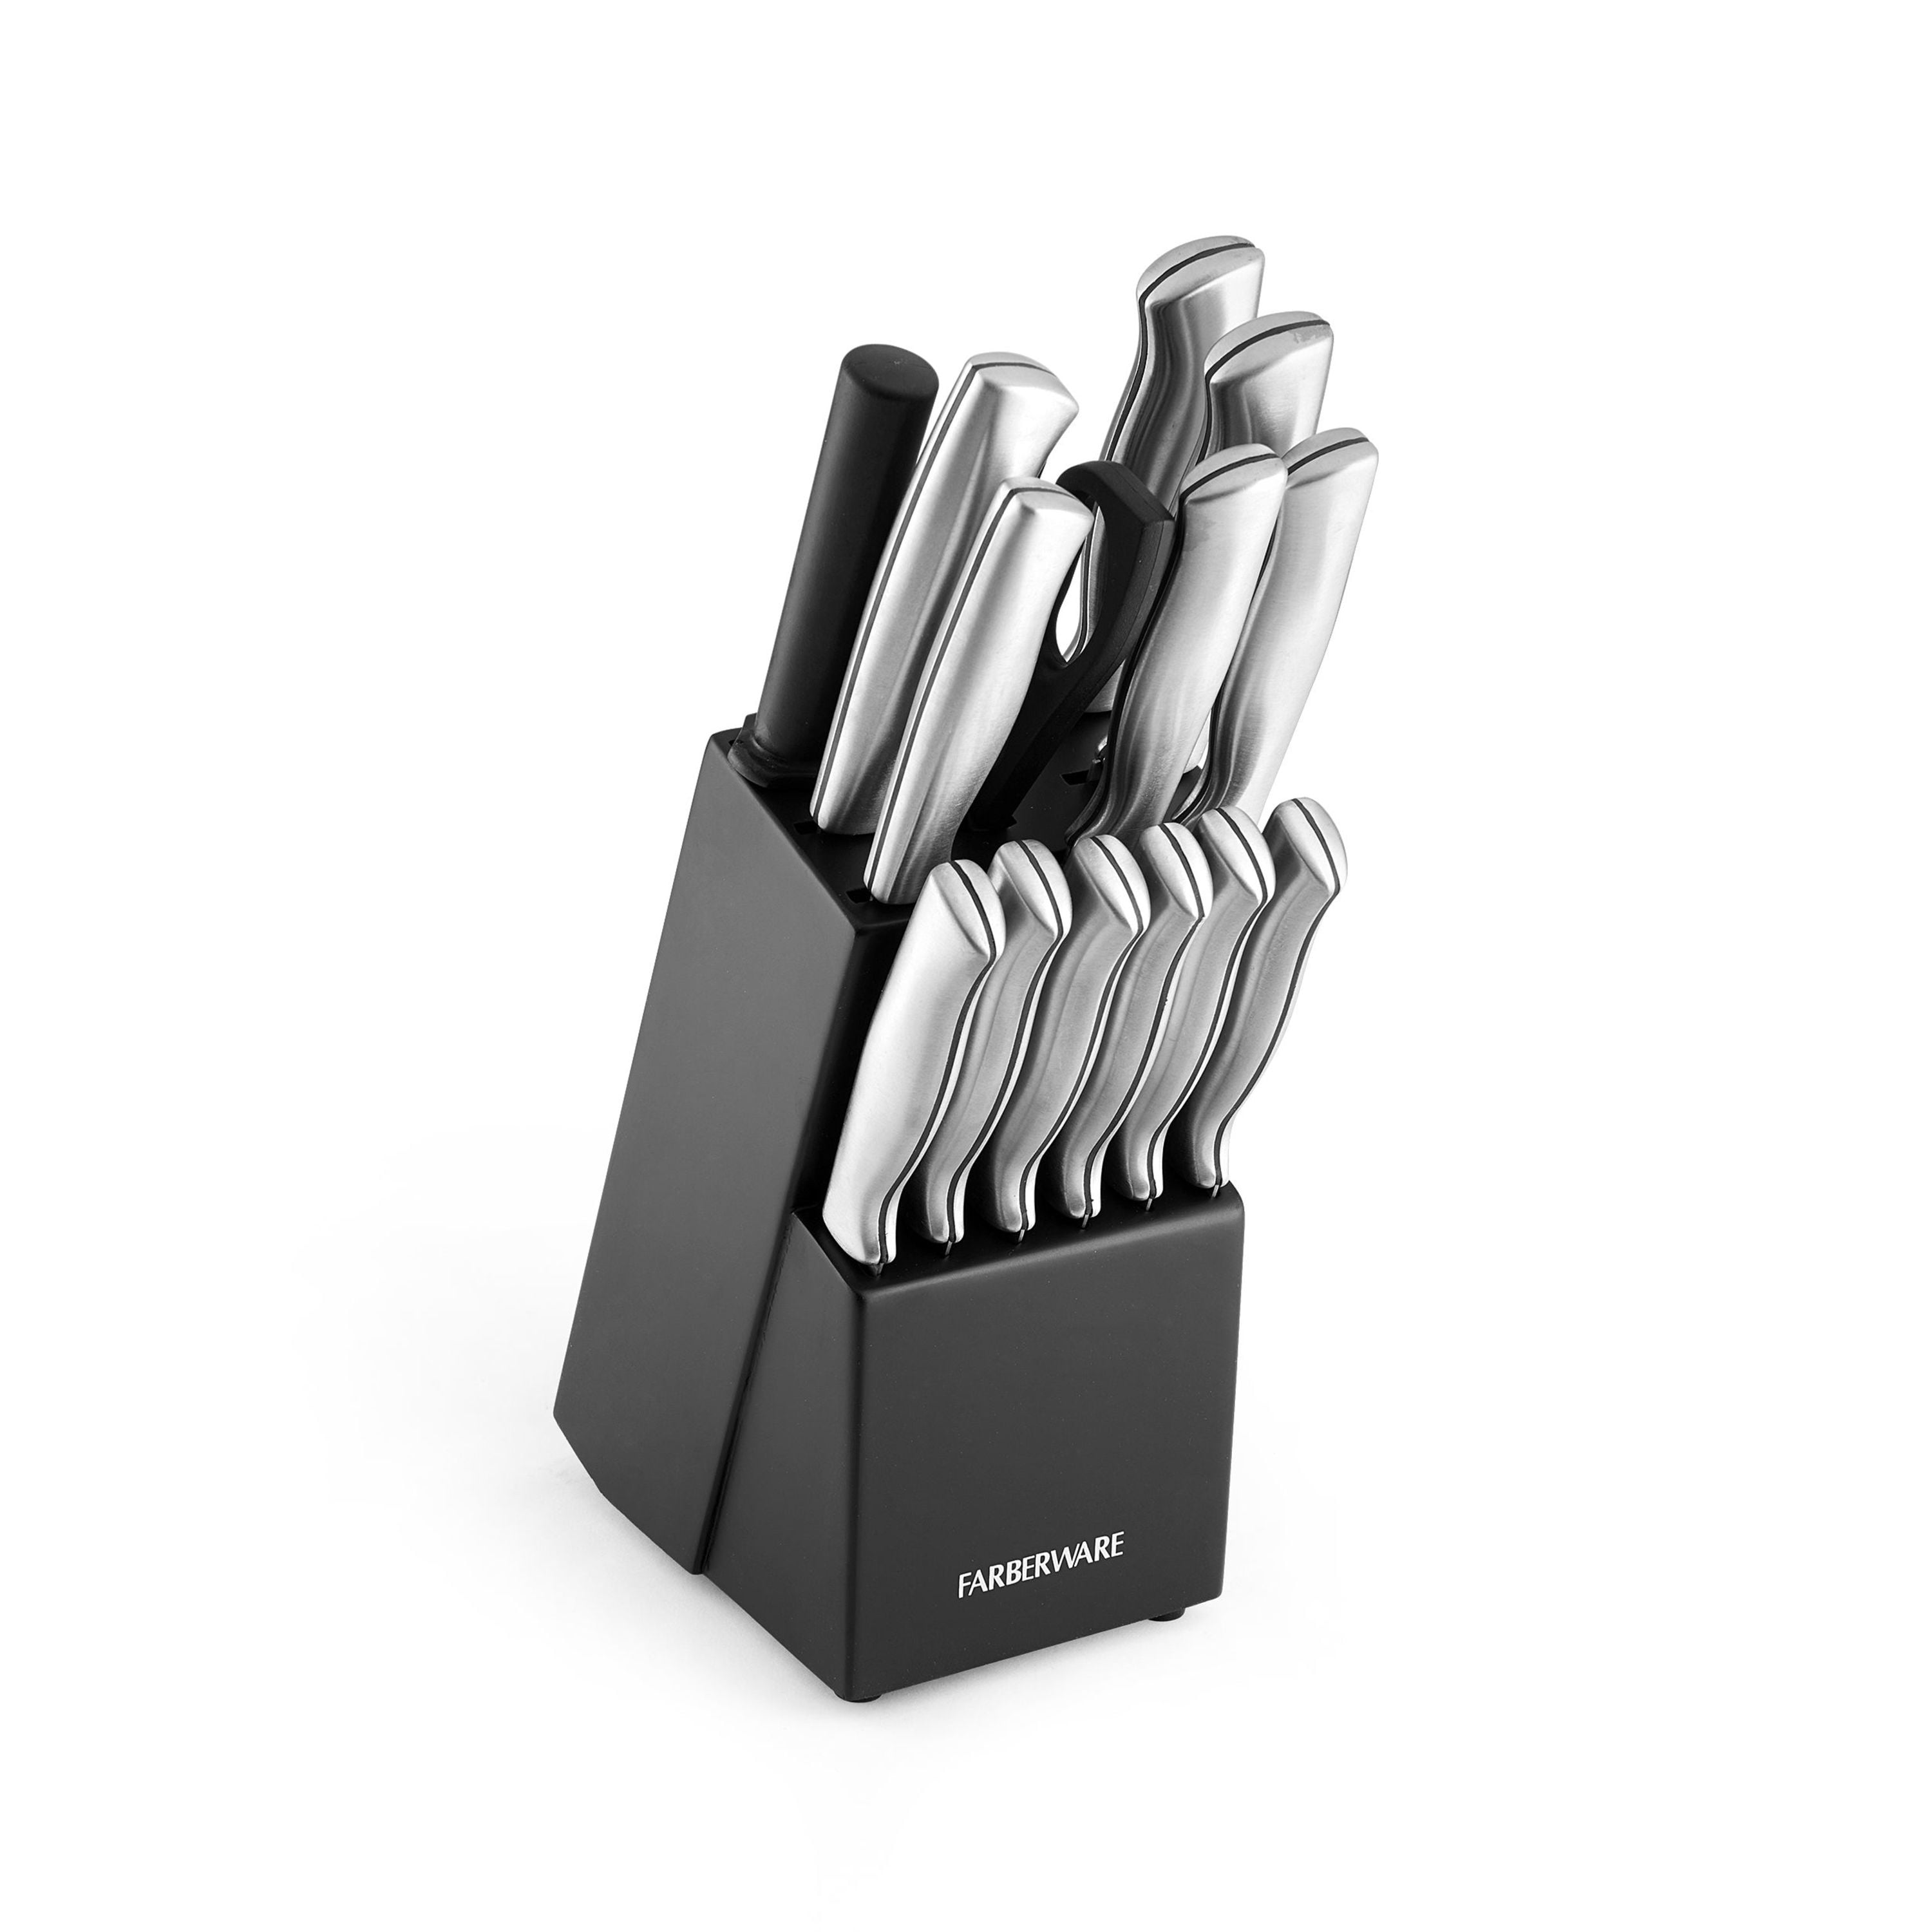 Farberware 15-piece Stamped Stainless Steel Knife Block Set - Walmart Farberware 15 Piece Stainless Steel Knife Set